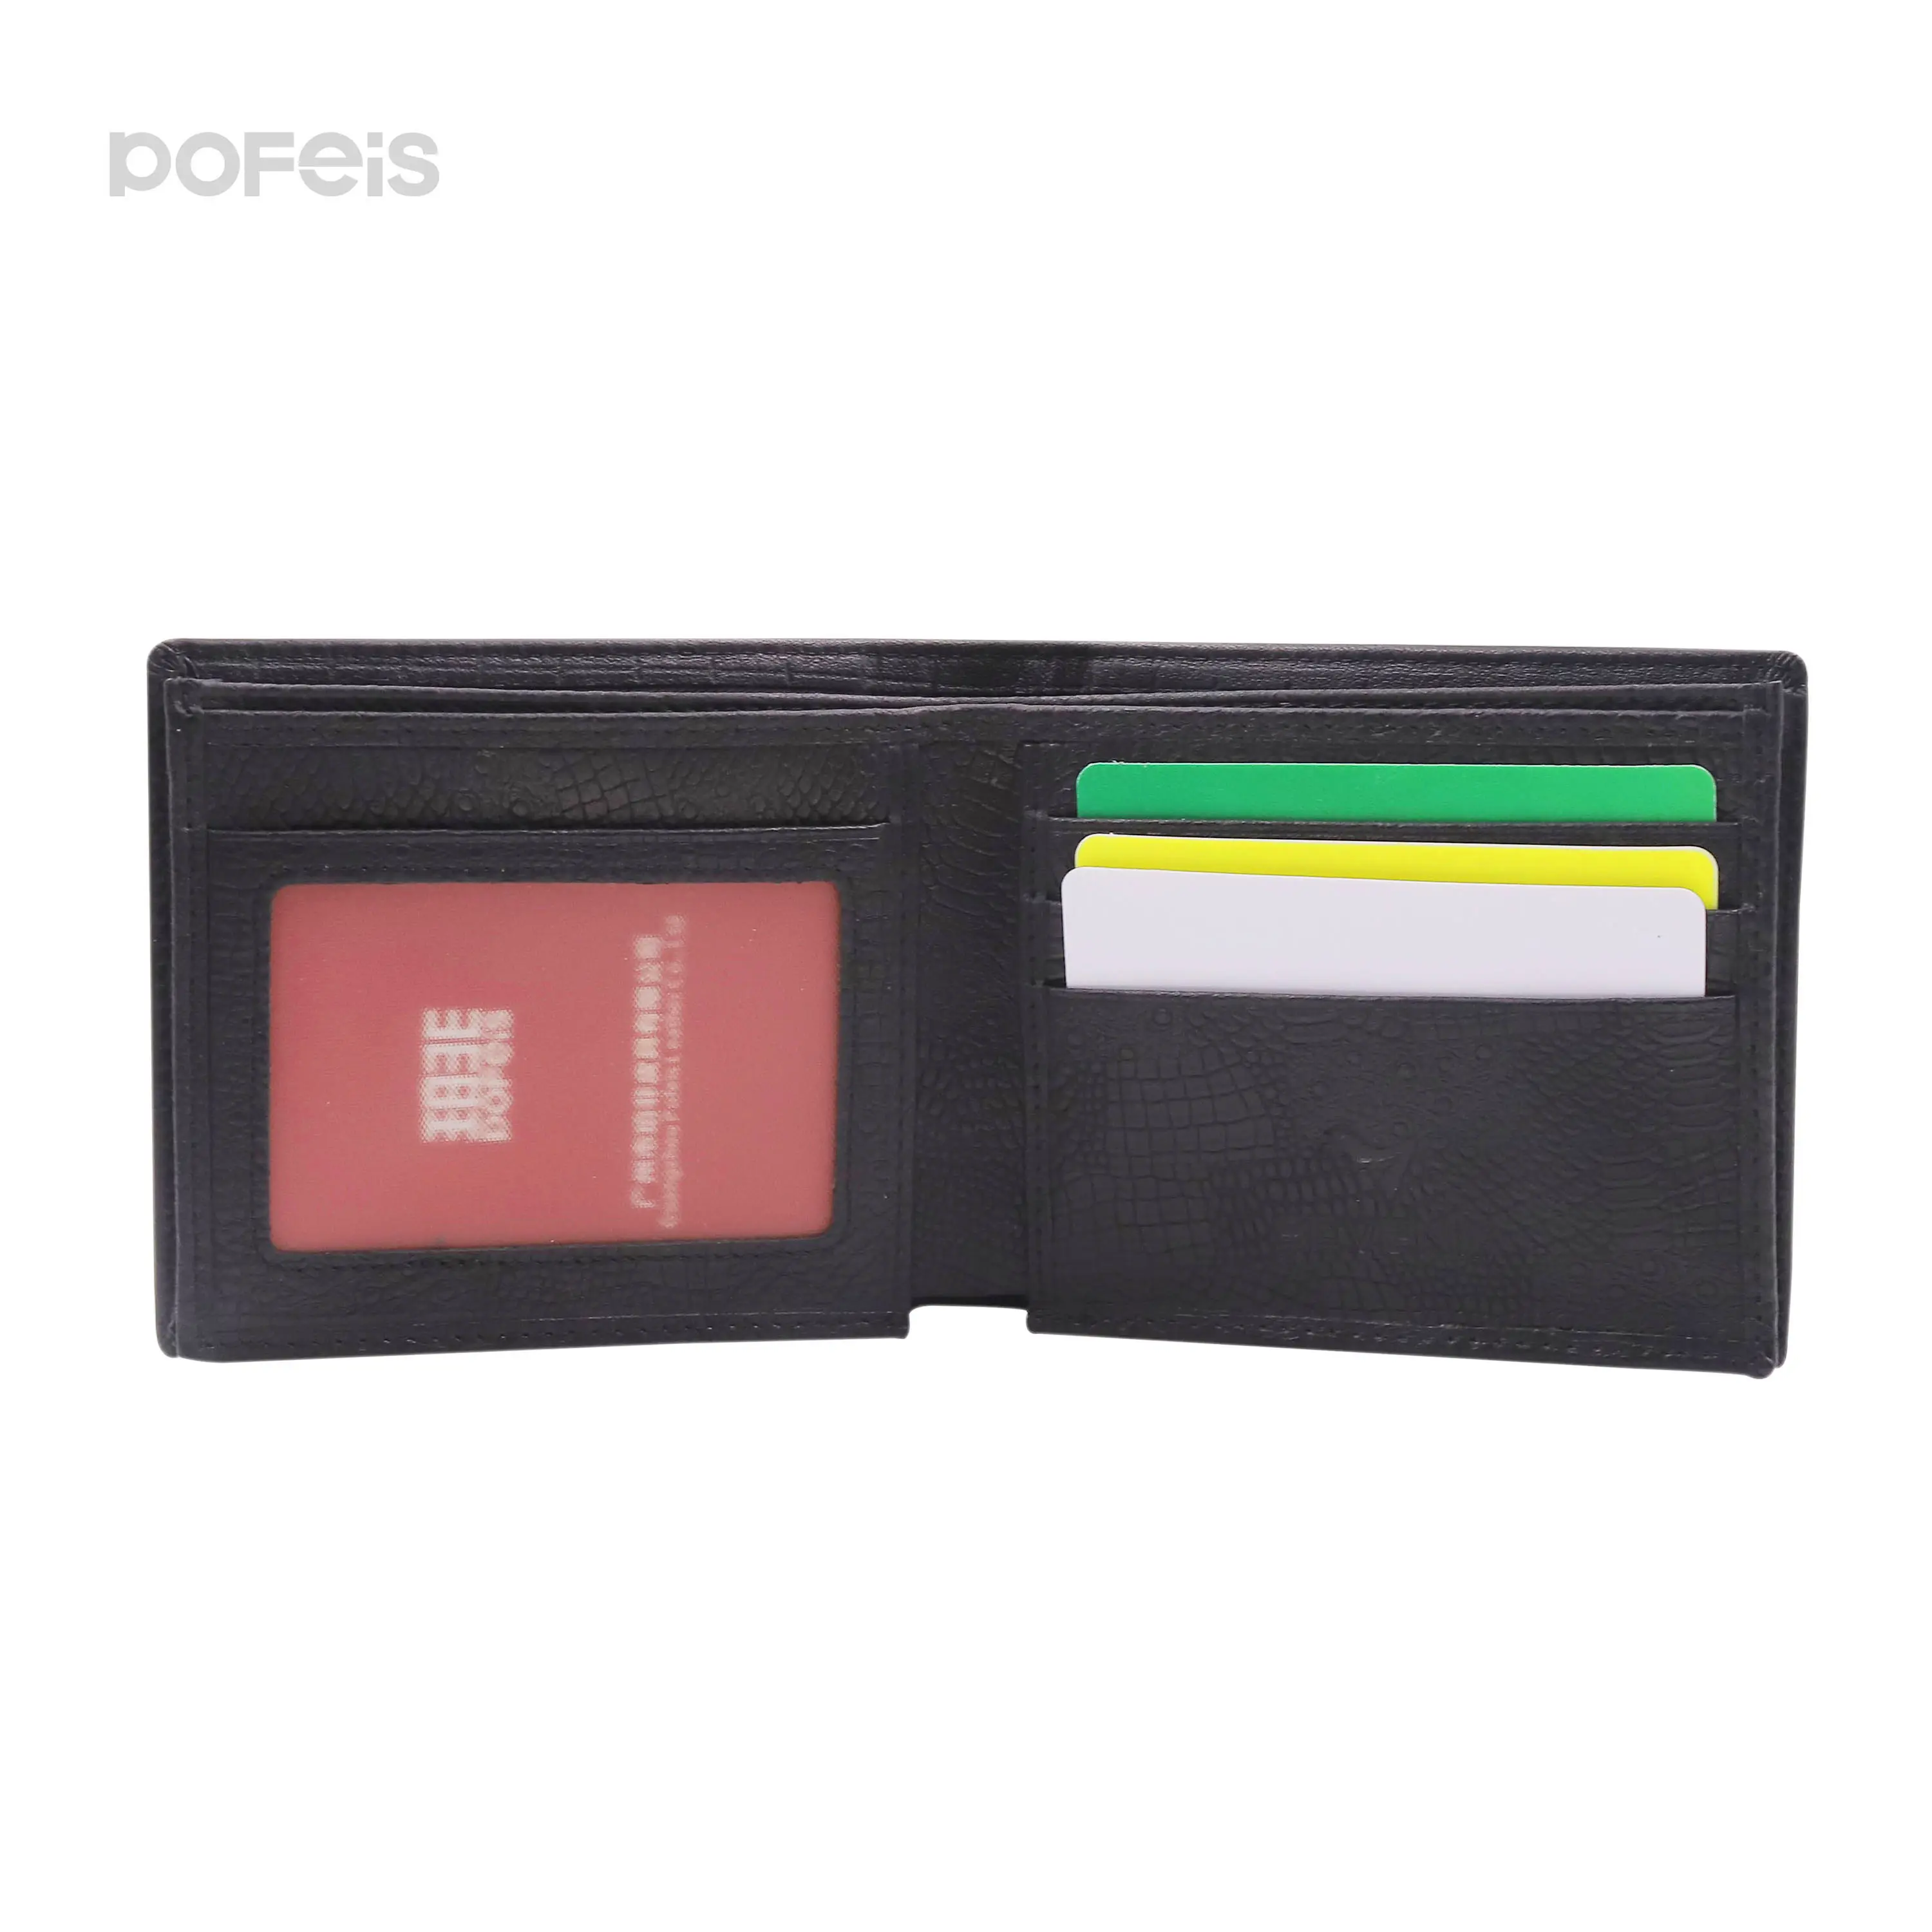 Mens Short Wallet Leather Male Casual Purse ID Cards Holder Clutch Coin Purse Money Pocket Bags Black